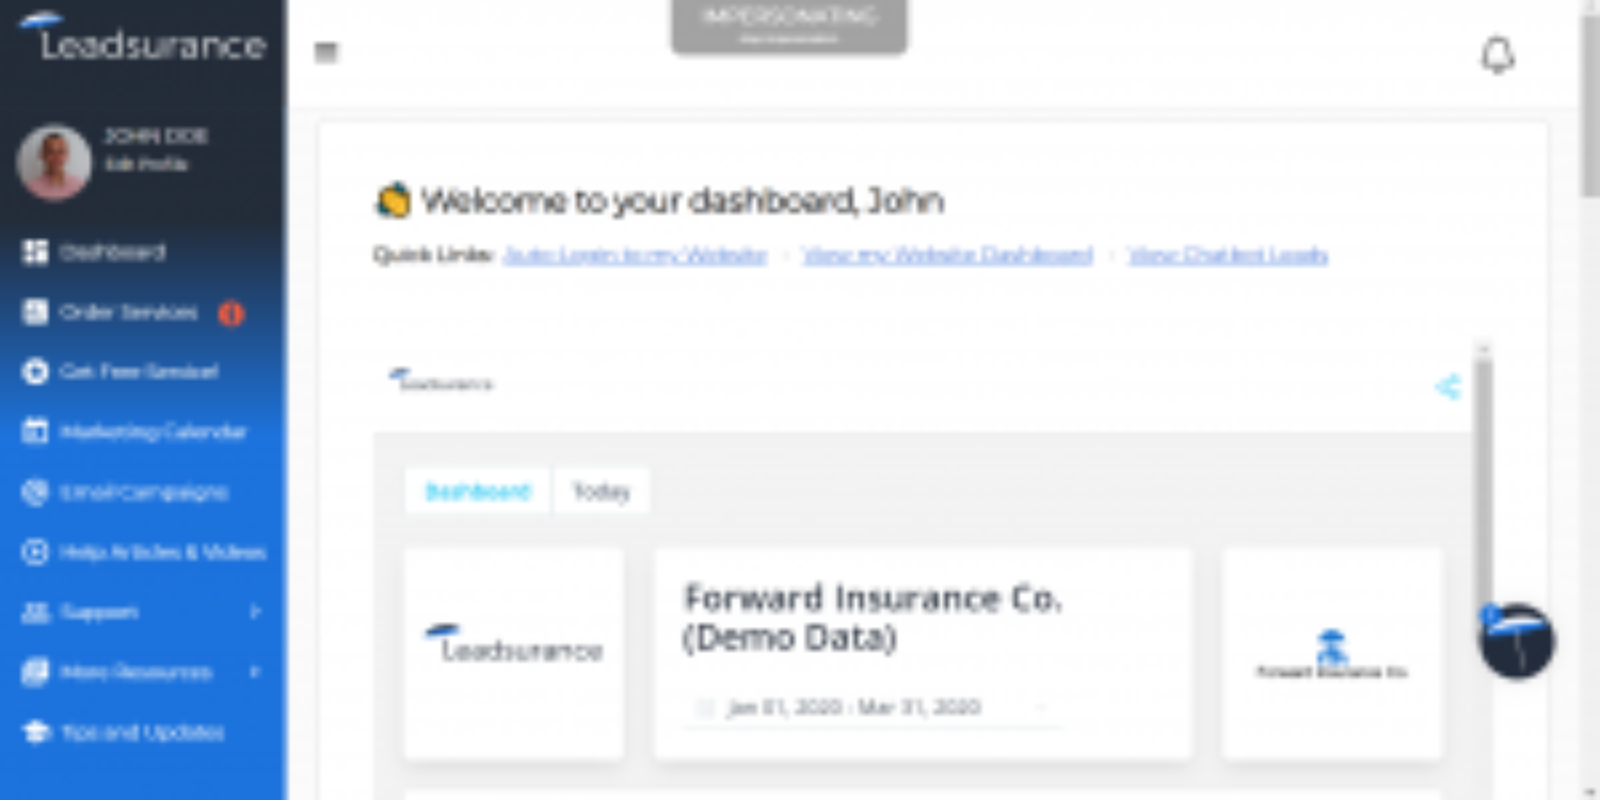 The New Leadsurance Client Success Dashboard